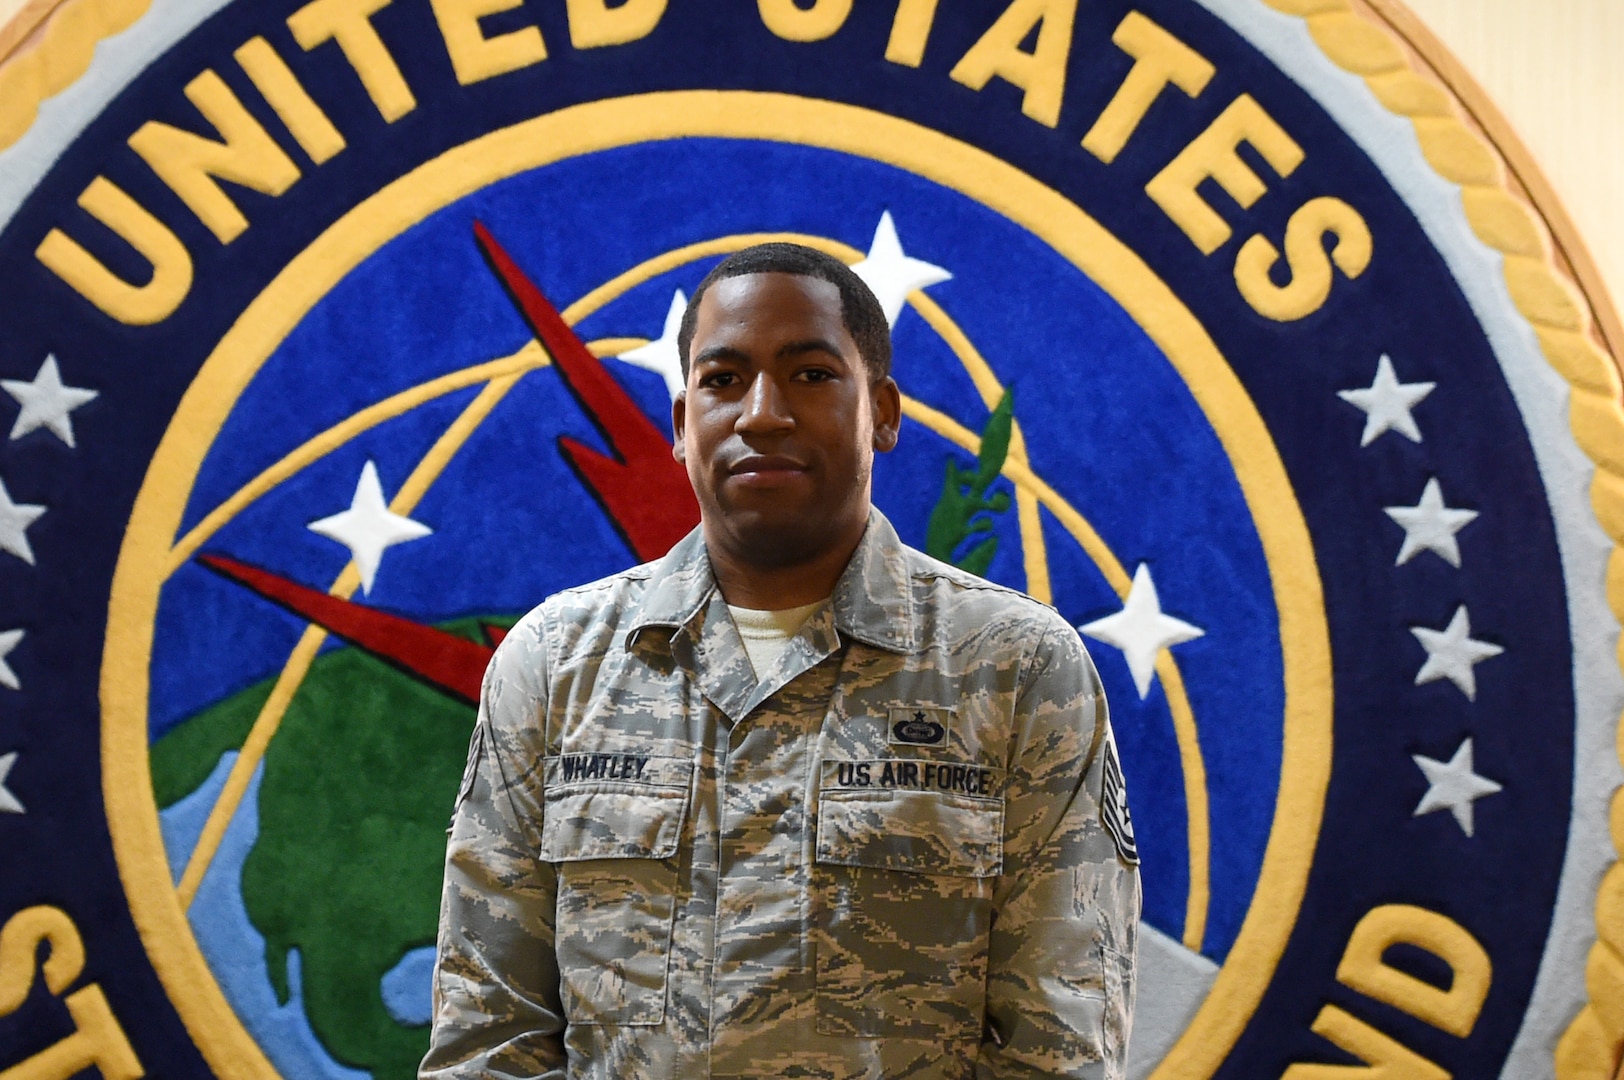 Tech. Sgt. Bryant Whatley is selected as the Enlisted Corps Spotlight for September.